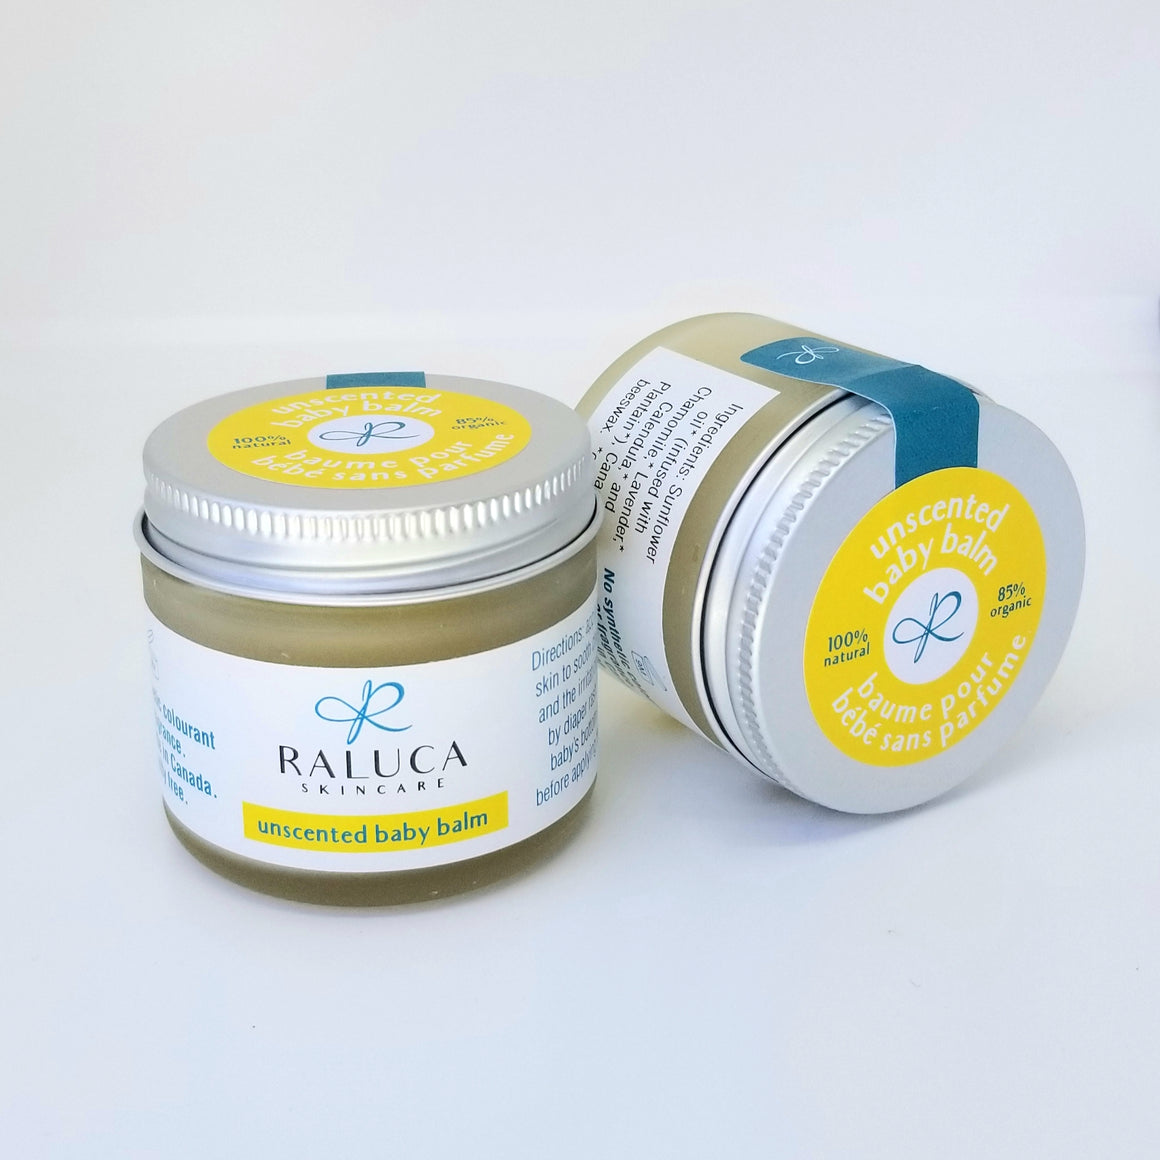 Raluca Skincare - Baby Balm - Unscented